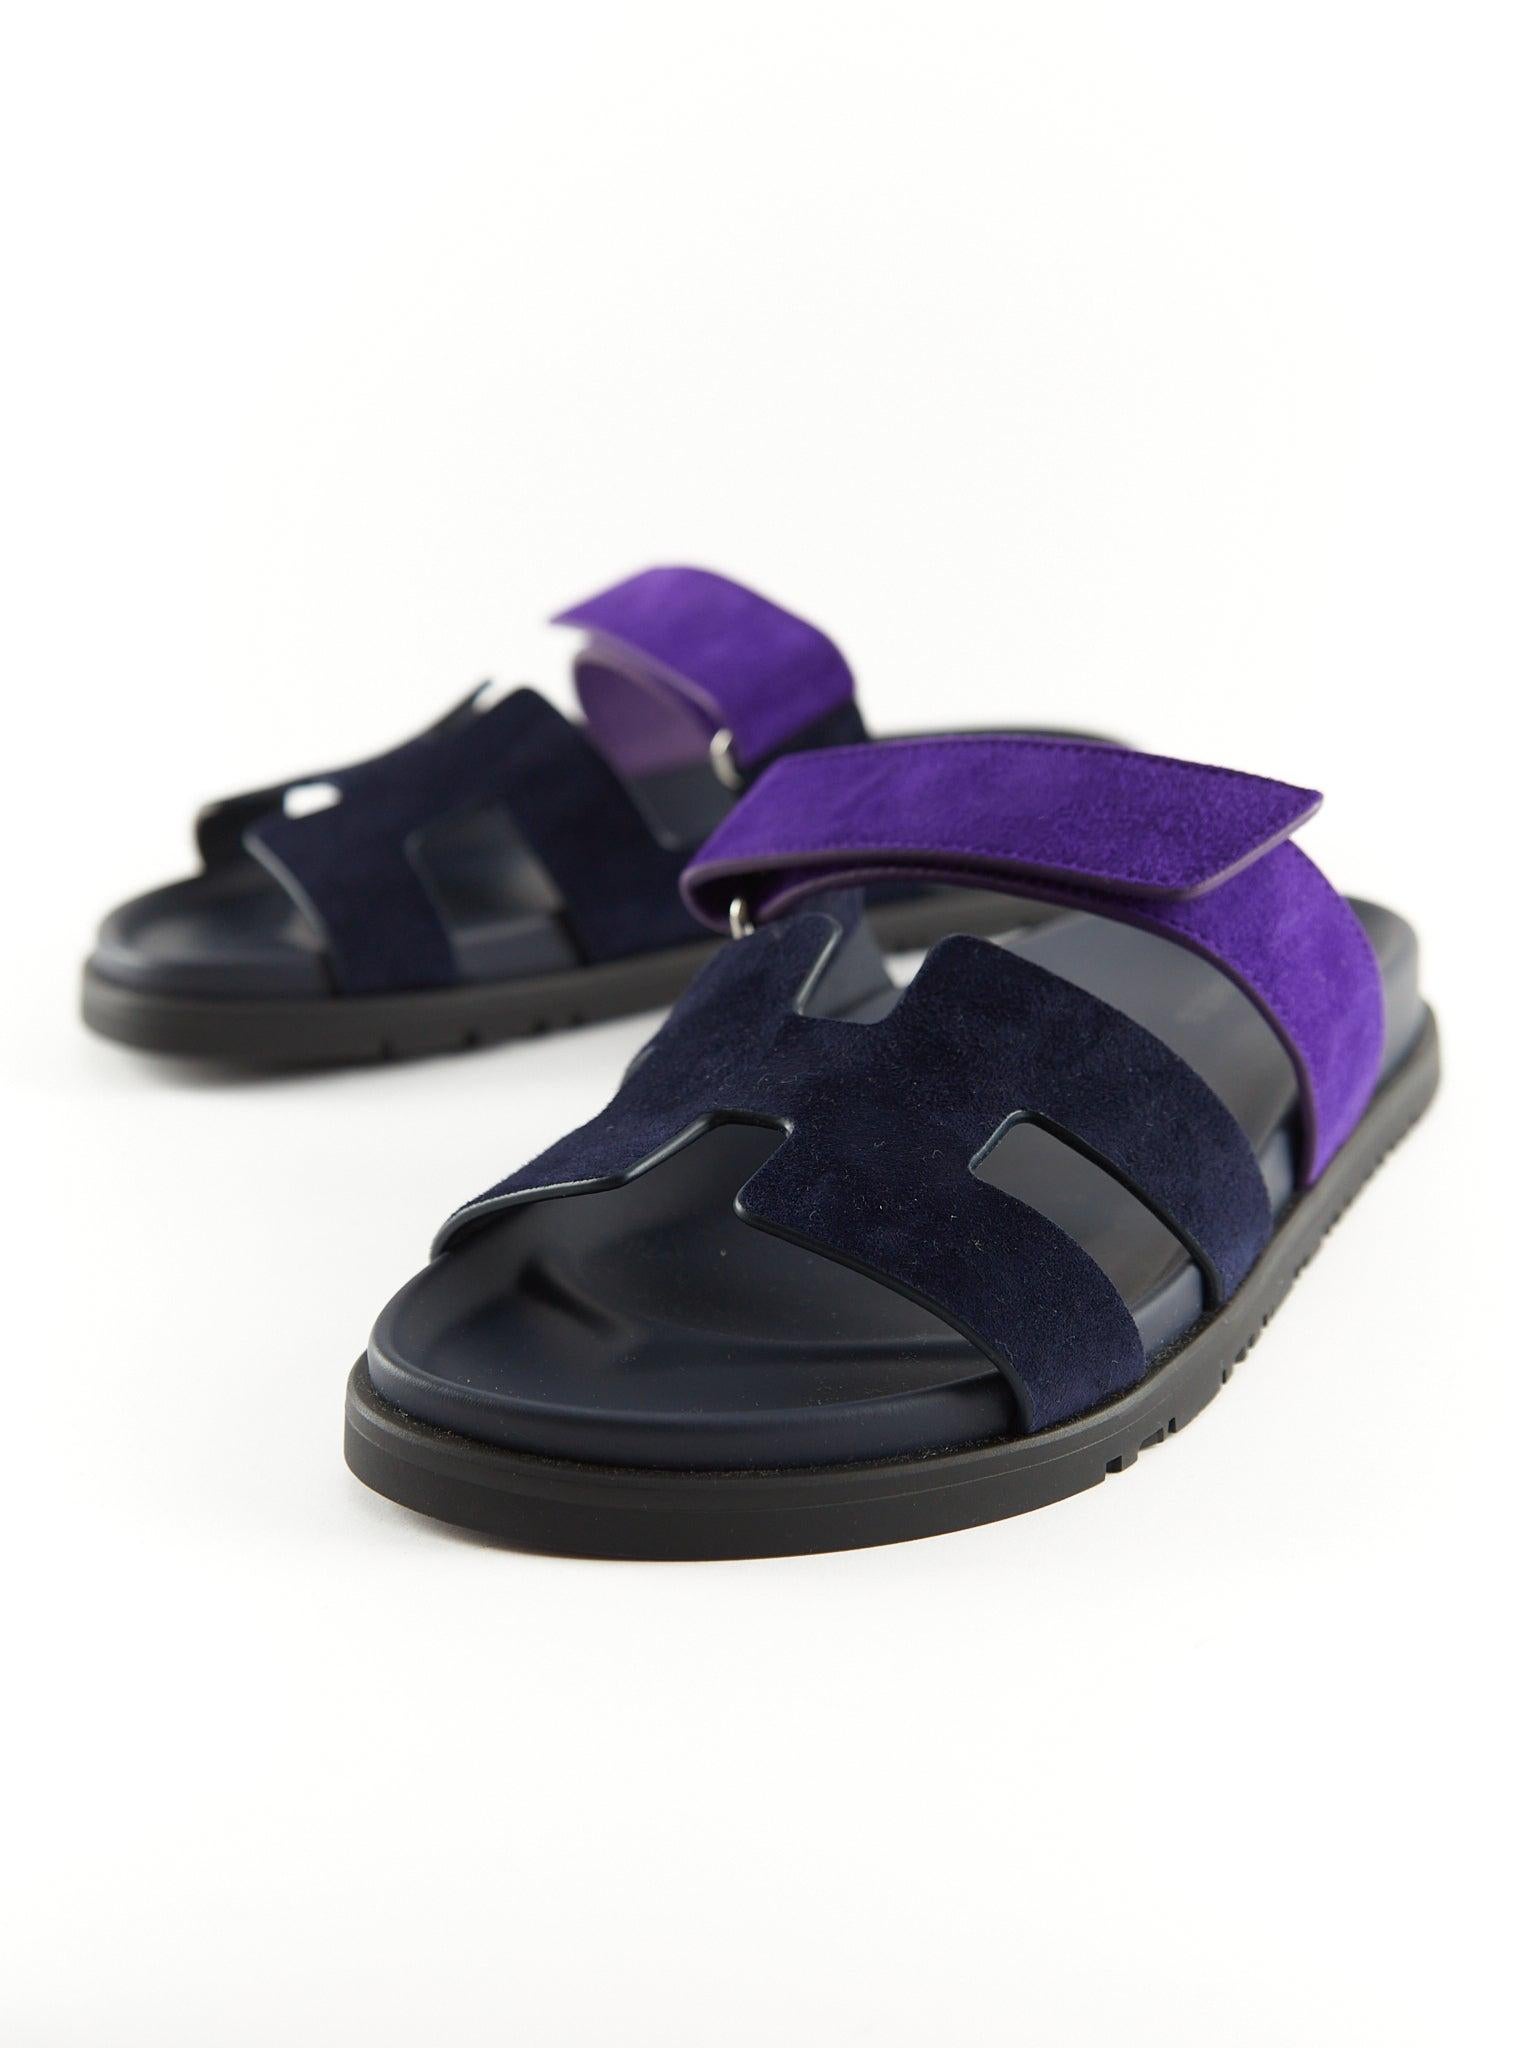 Hermès Techno-sandal in Violet Fonce and Majorette

Suede goatskin with anatomical rubber sole and adjustable strap

Made in Italy

Accompanied by: Hermès box, dust bags and ribbon

Size 37.5